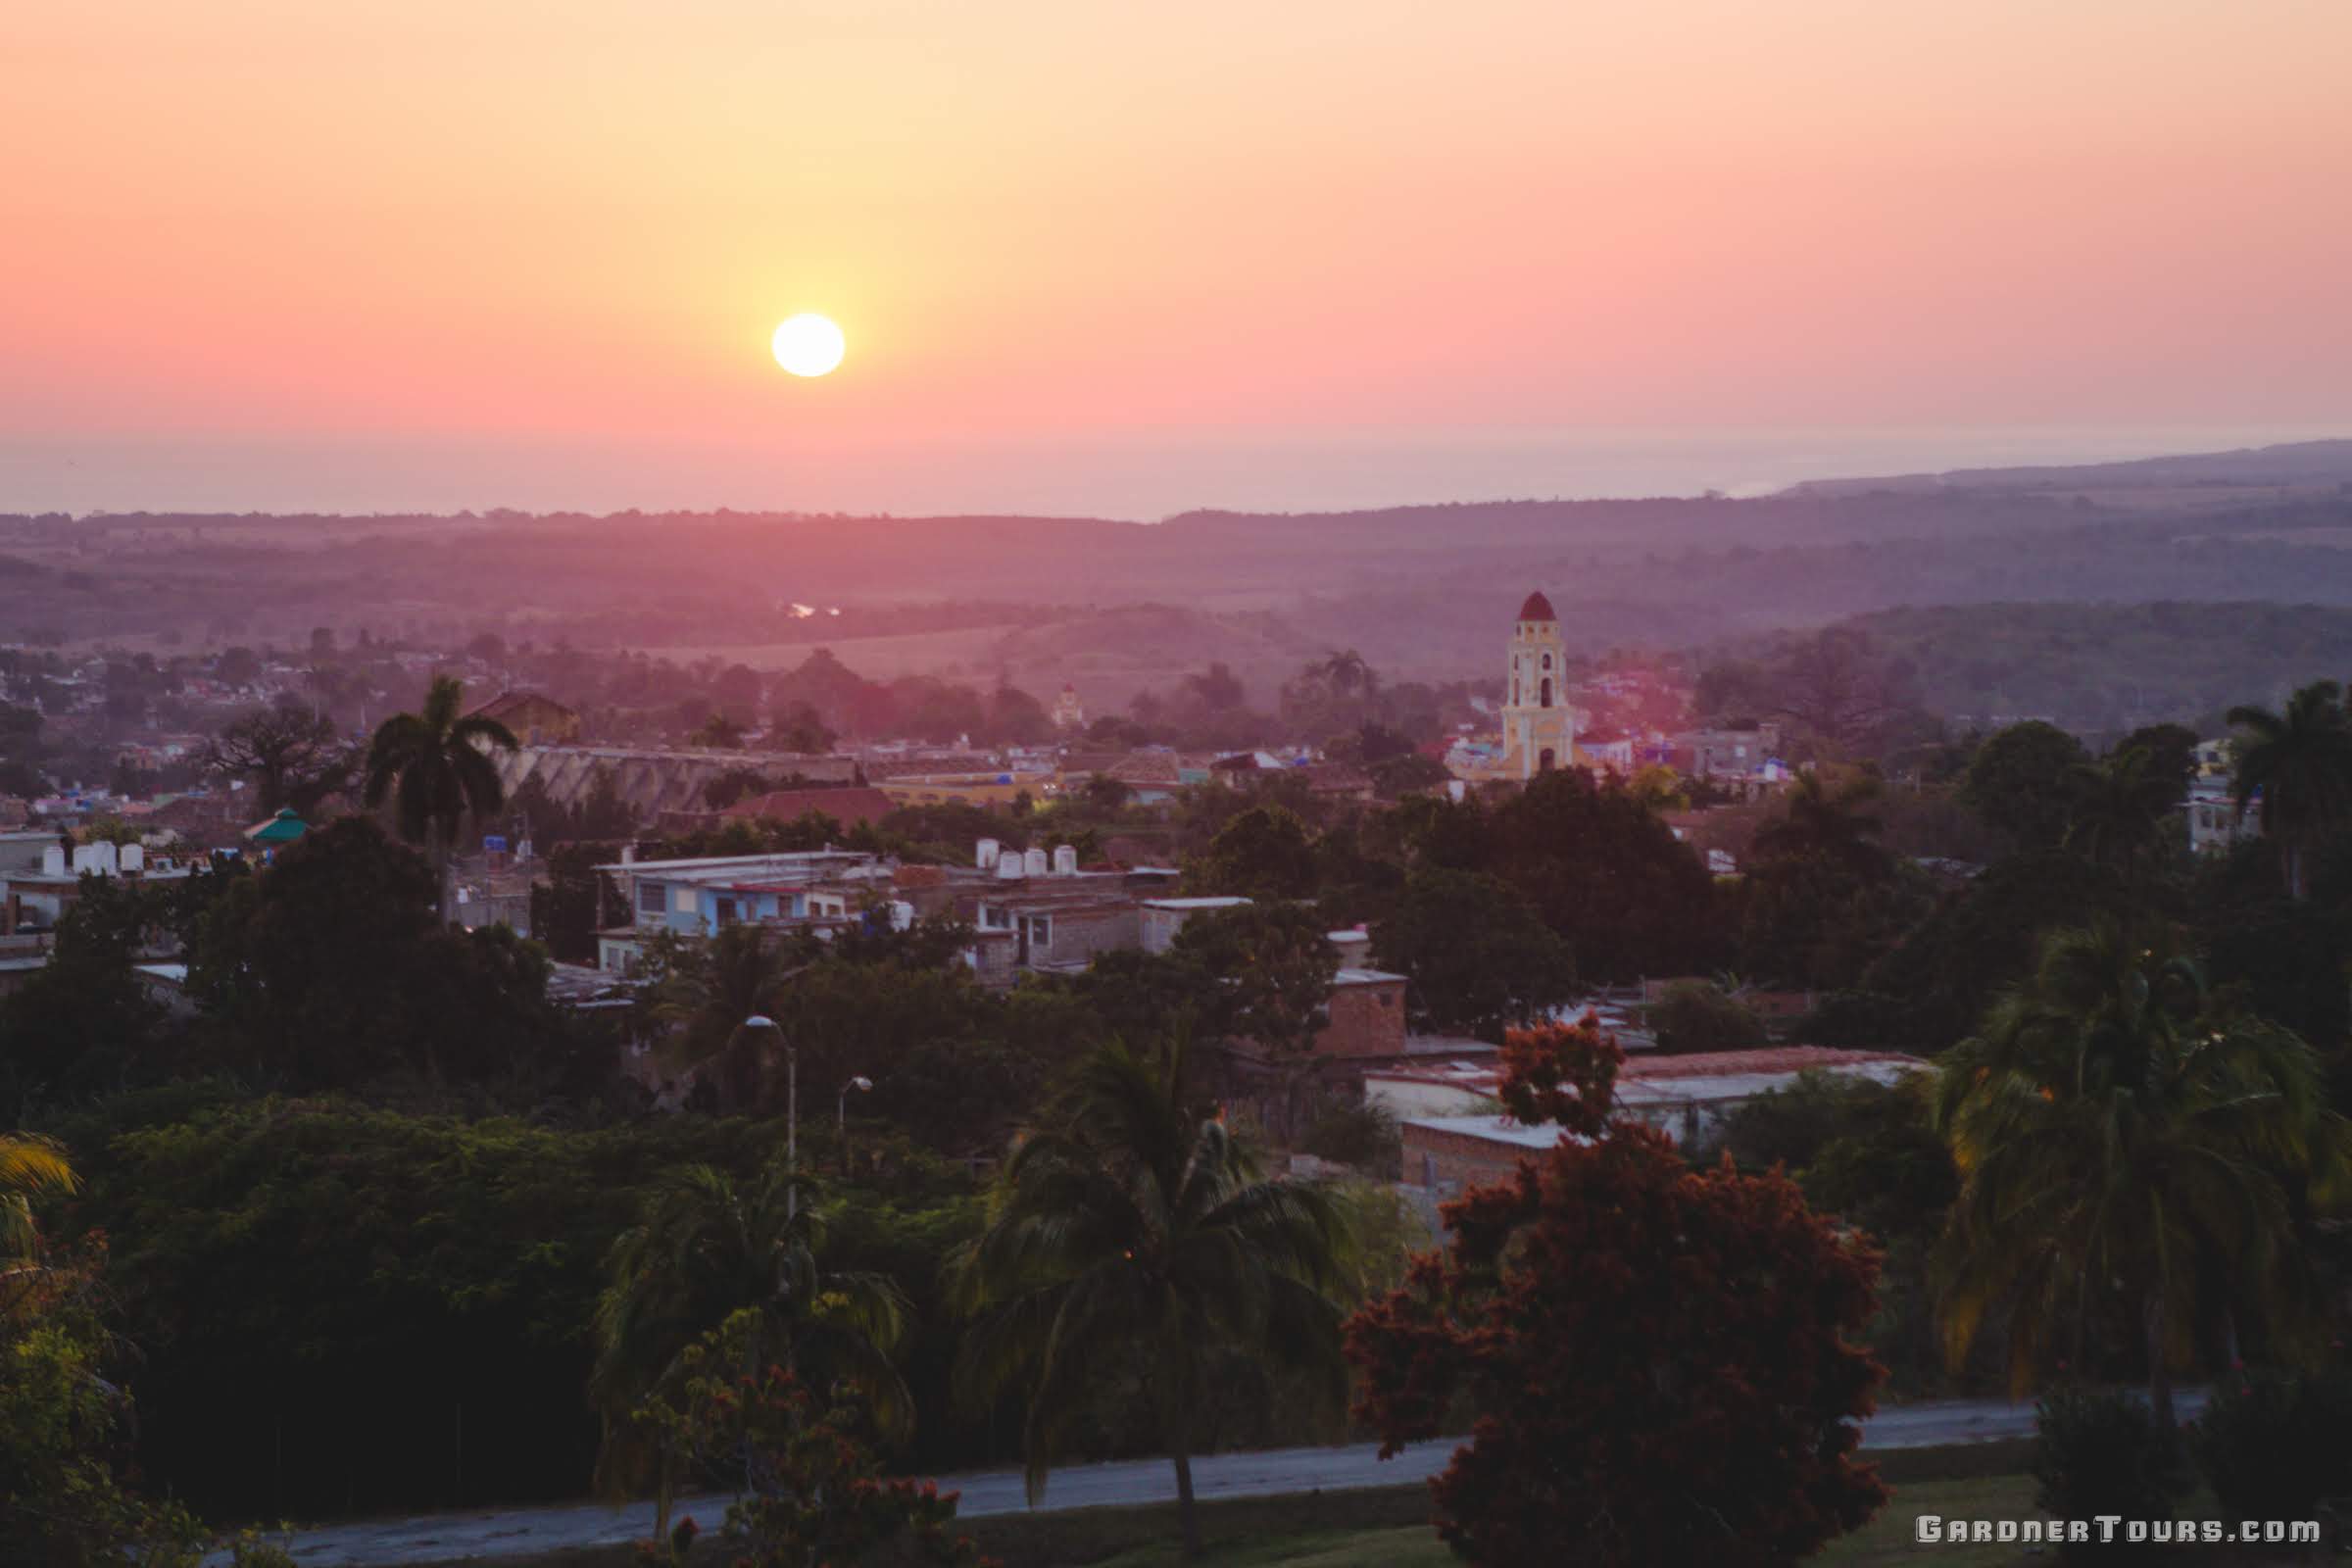 Sunset over Trinidad, Cuba with the Tower at Plaza Mayor in View